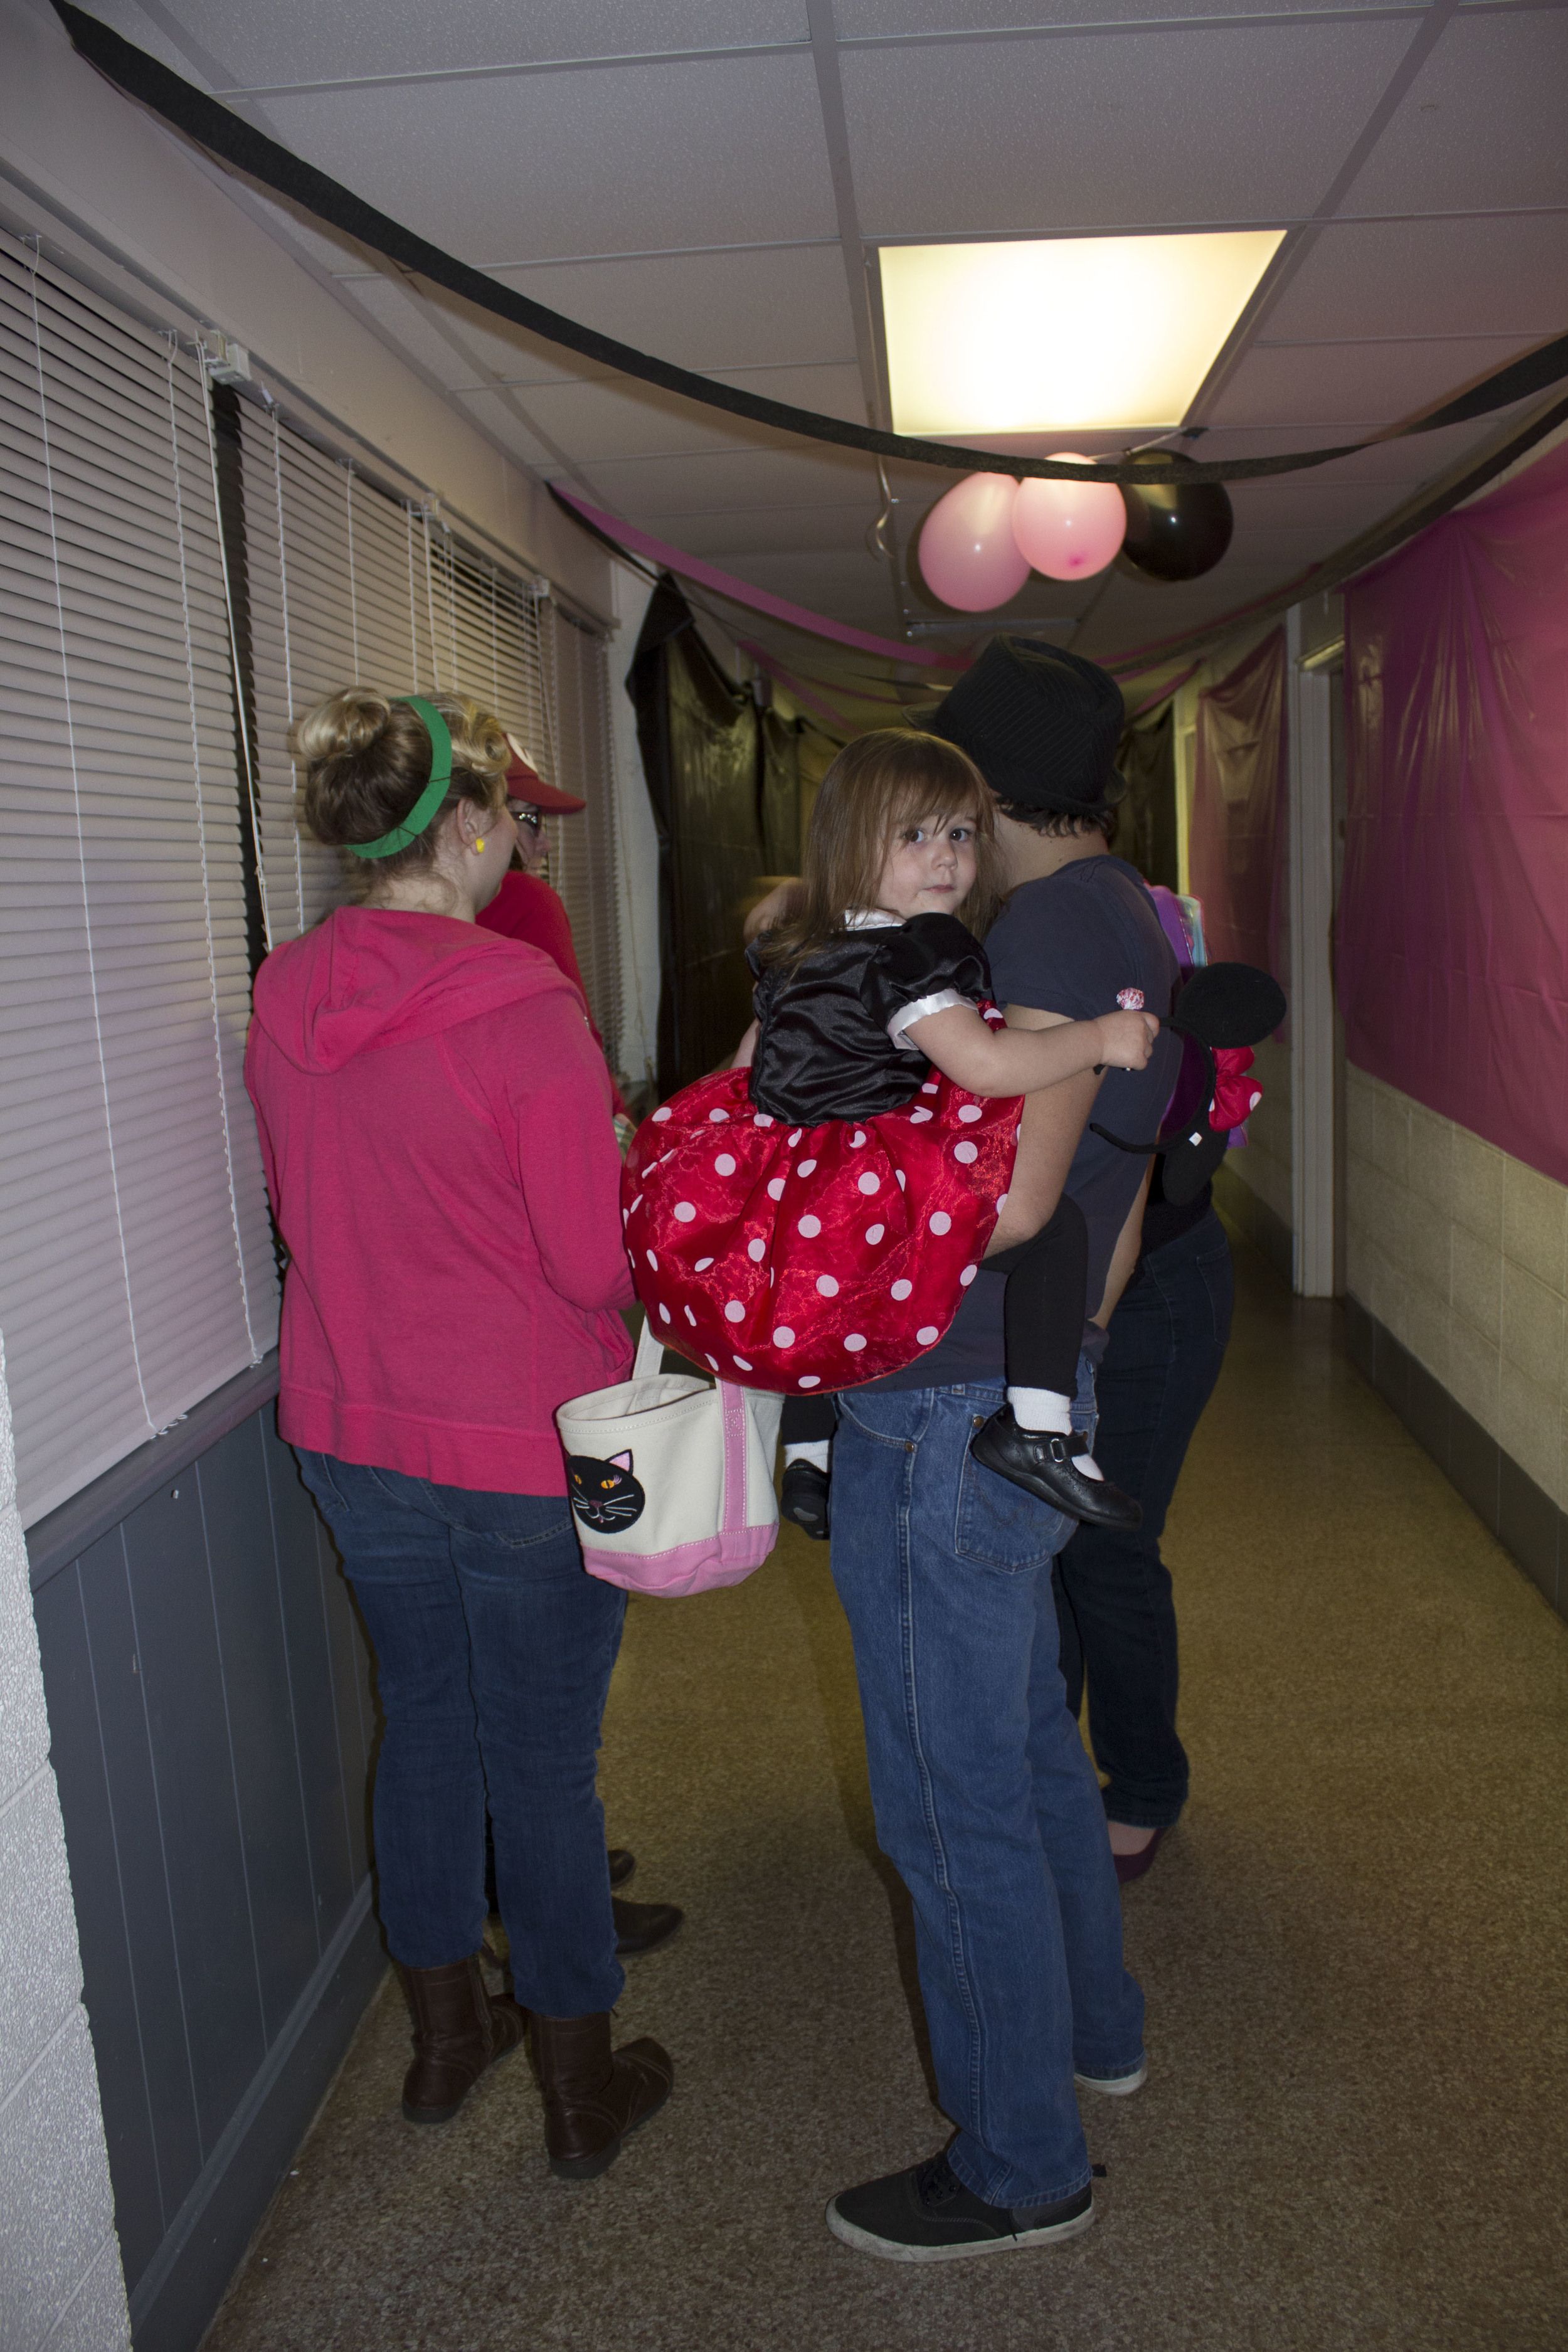  Families enjoyed the laid back, fun atmosphere the open dorms allowed for their kids during Halloween.&nbsp; 